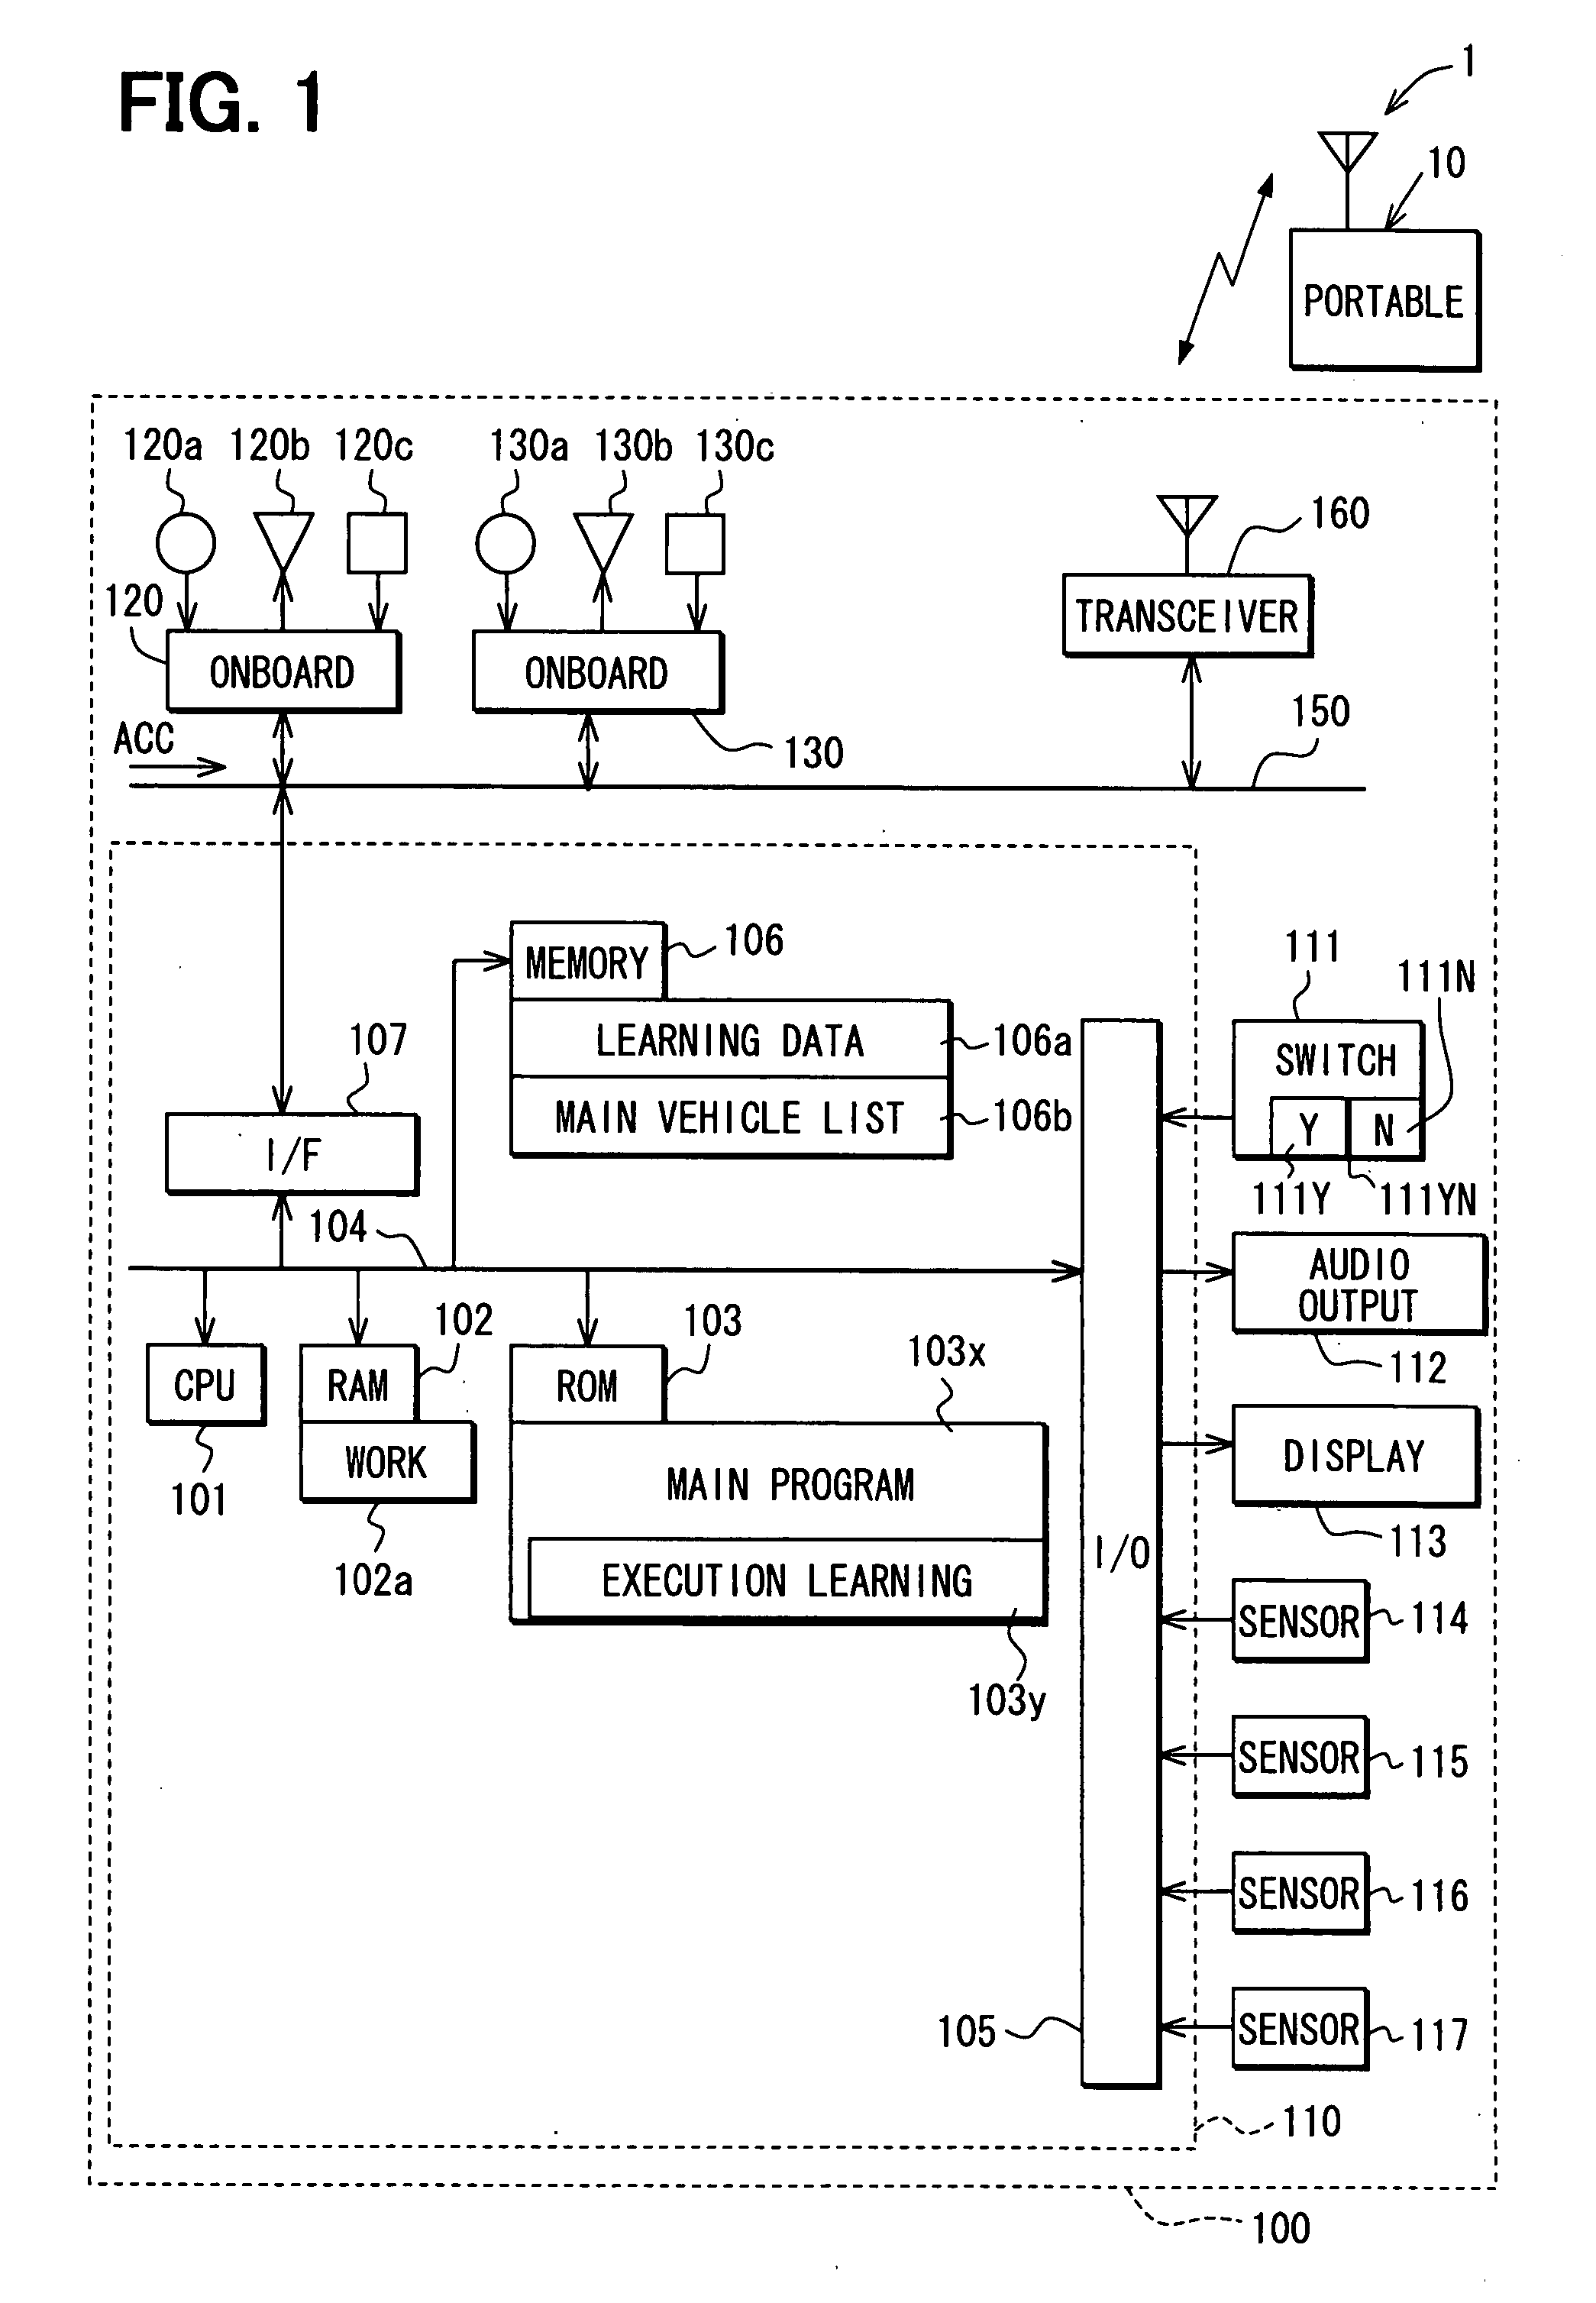 User assistance system for vehicle